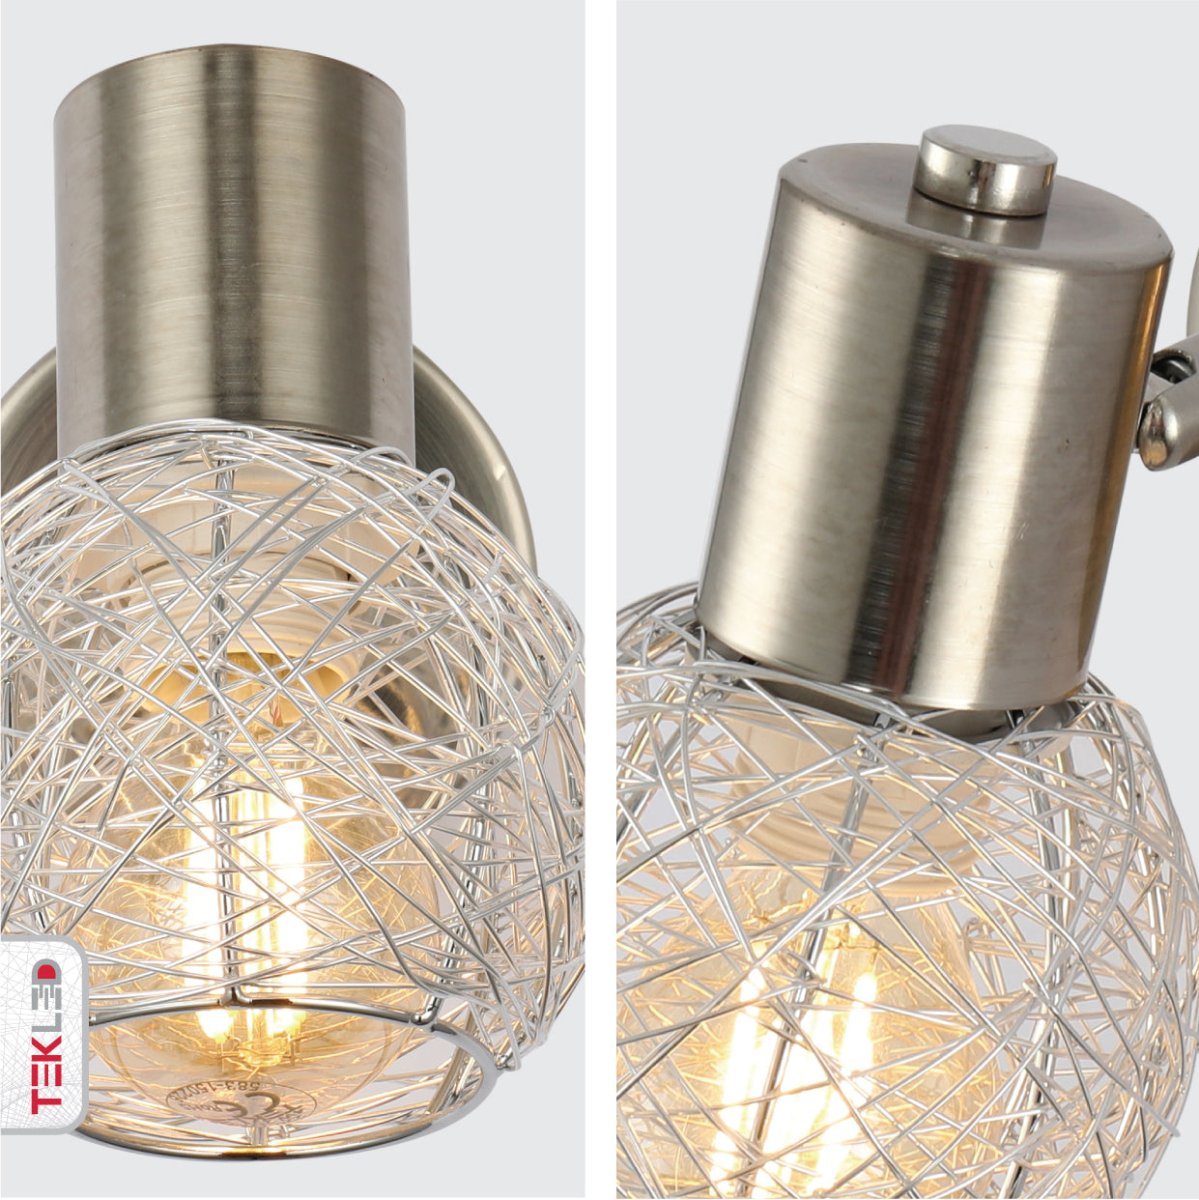 Detailed shots of Matte Nickel Metal Silver Globe Nest Hinged Wall Light with E14 Fitting | TEKLED 151-19697